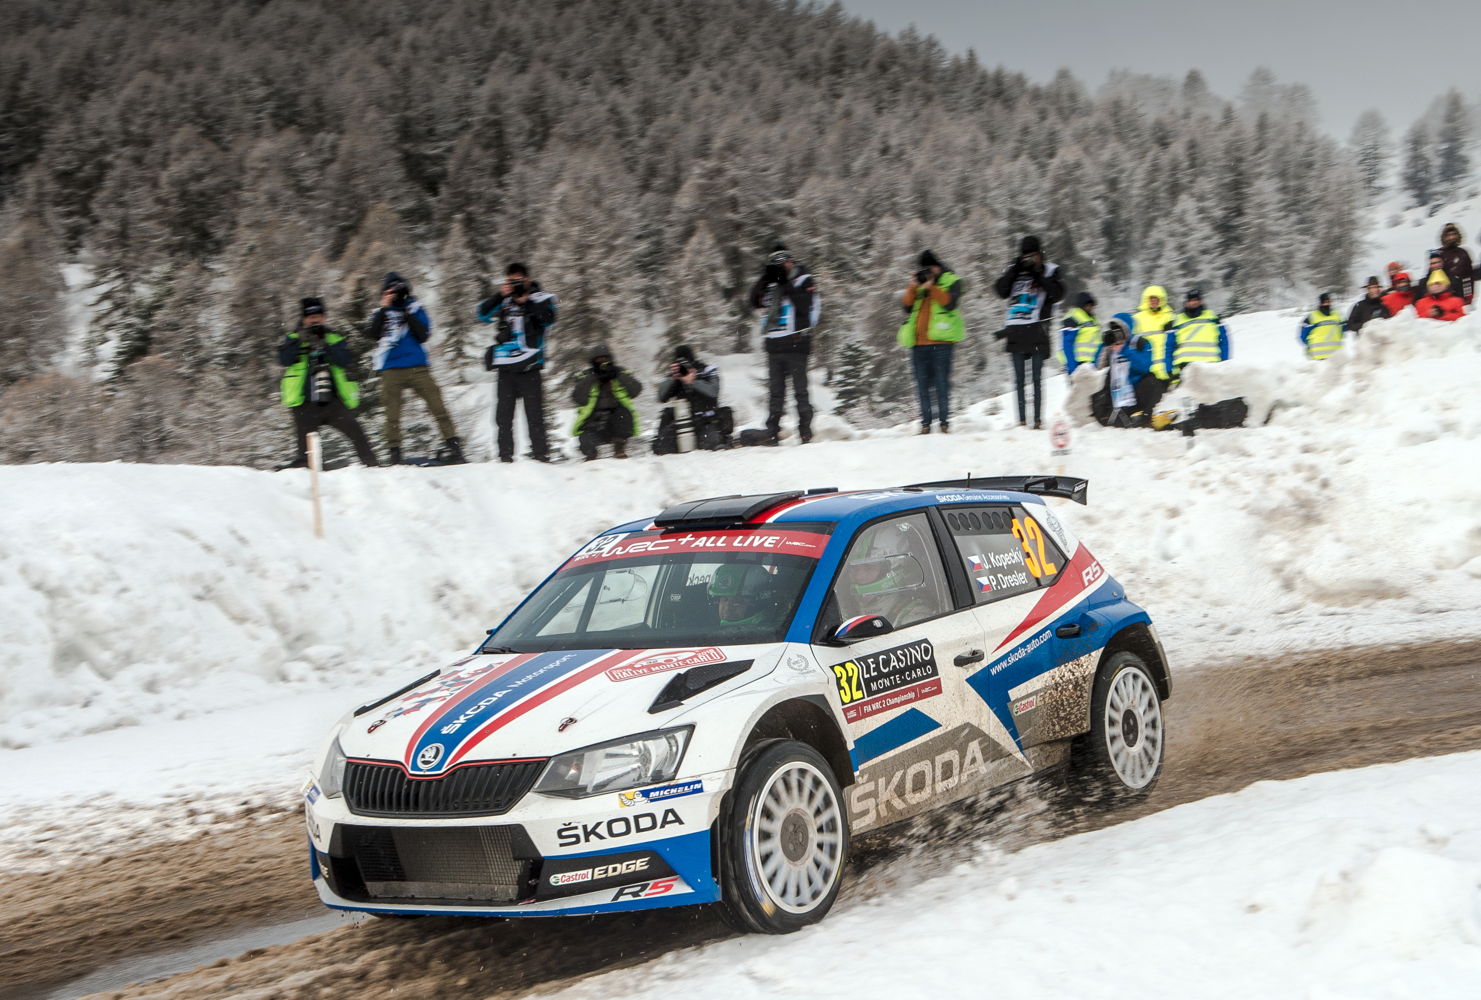 On the third day of the Rally Monte-Carlo, Jan Kopecký/Pavel Dresler, driving a ŠKODA FABIA R5 carrying the tricolour of the Czech flag, increased their massive lead in WRC 2 category and RC 2 class